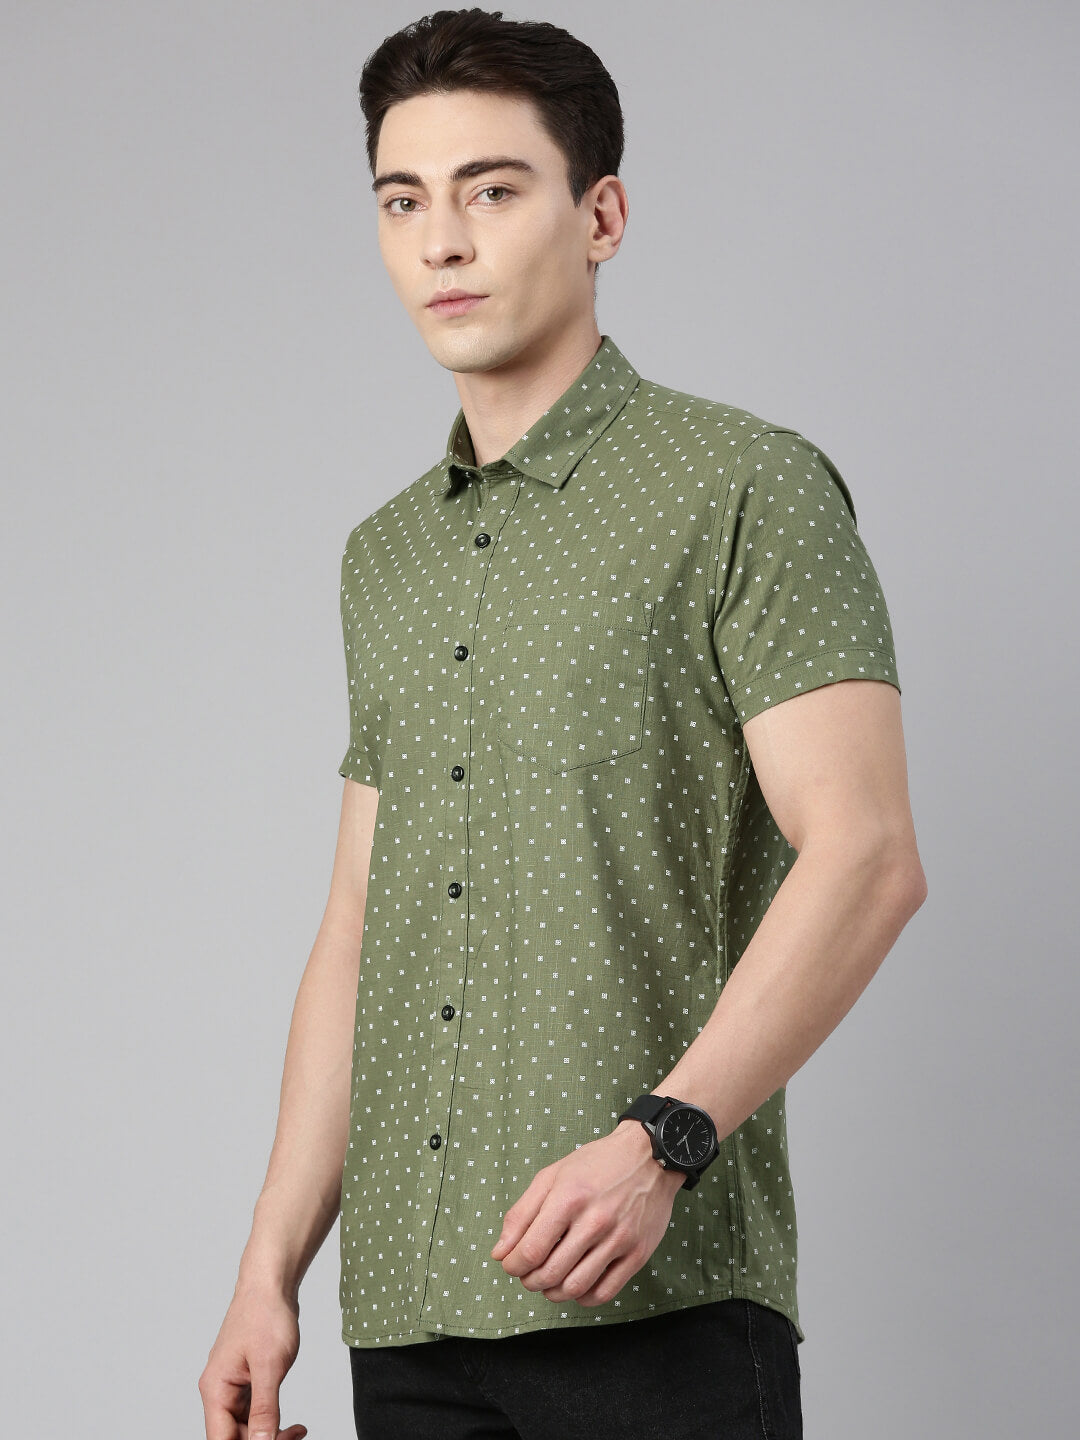 5thanfold Men's Pure Cotton Casual Half Sleeve Checkered Green Slim Fit Shirt